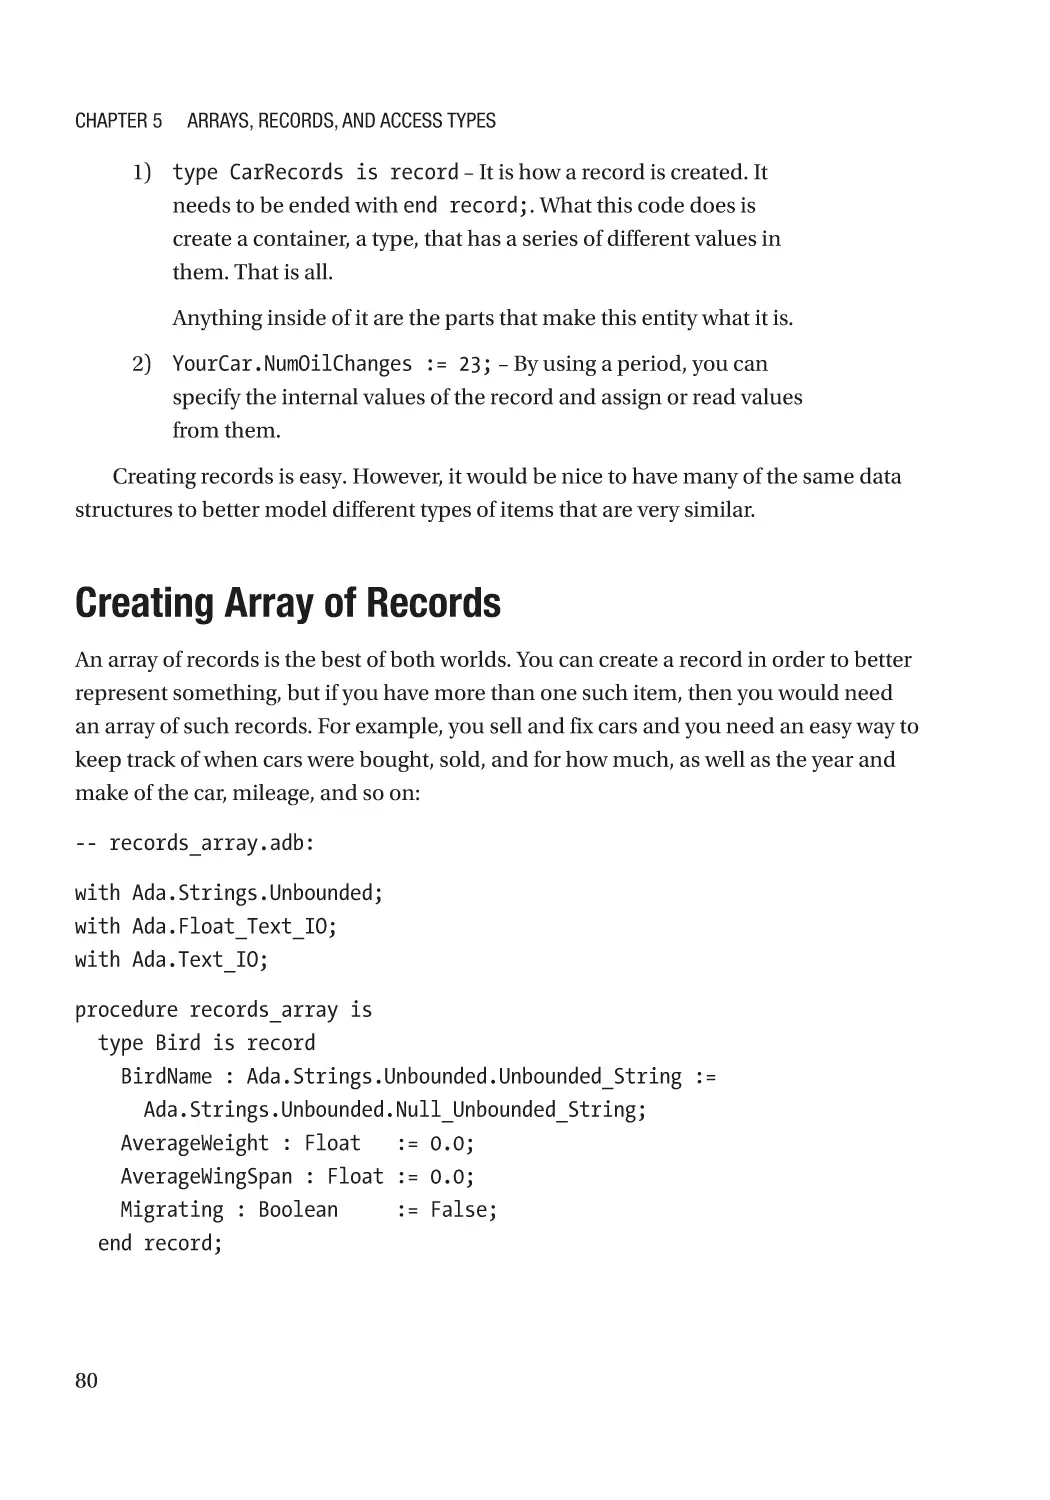 Creating Array of Records